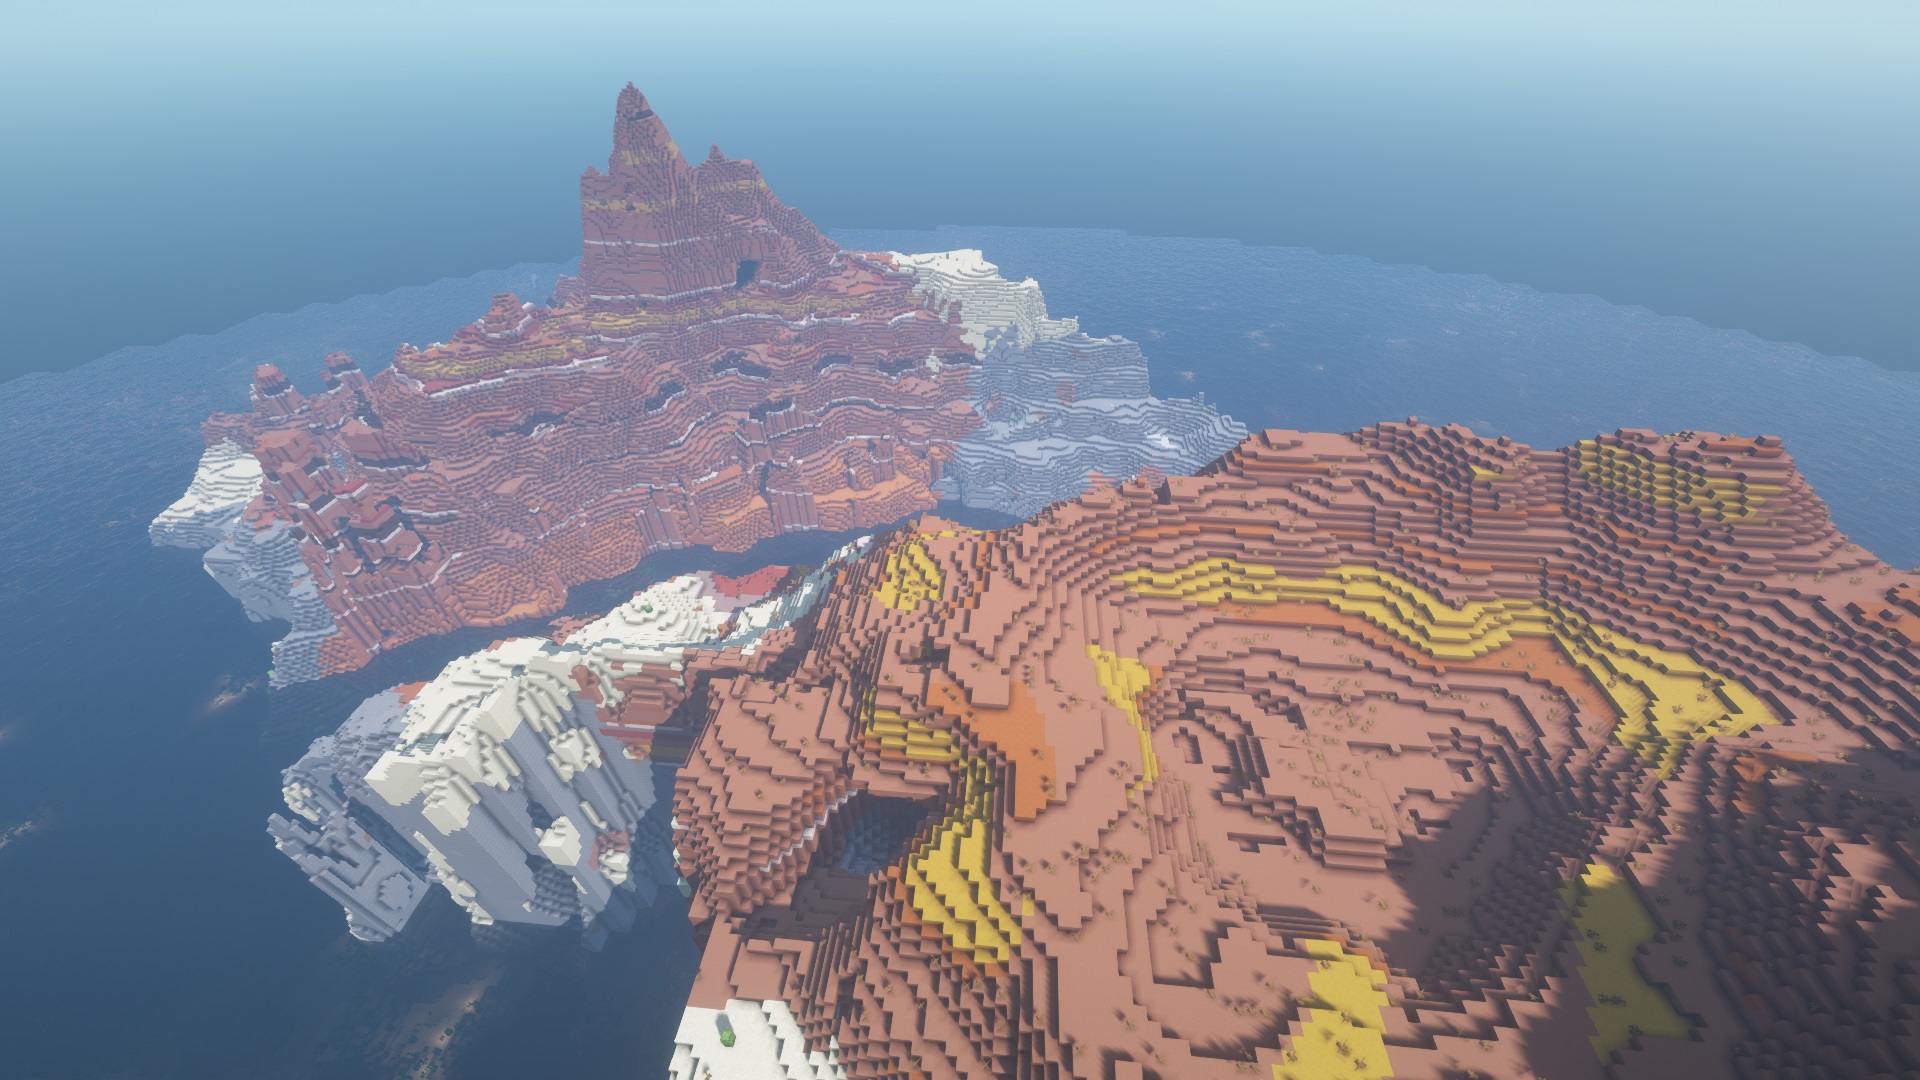 Minecraft seed - A large badlands island bisected by a river.